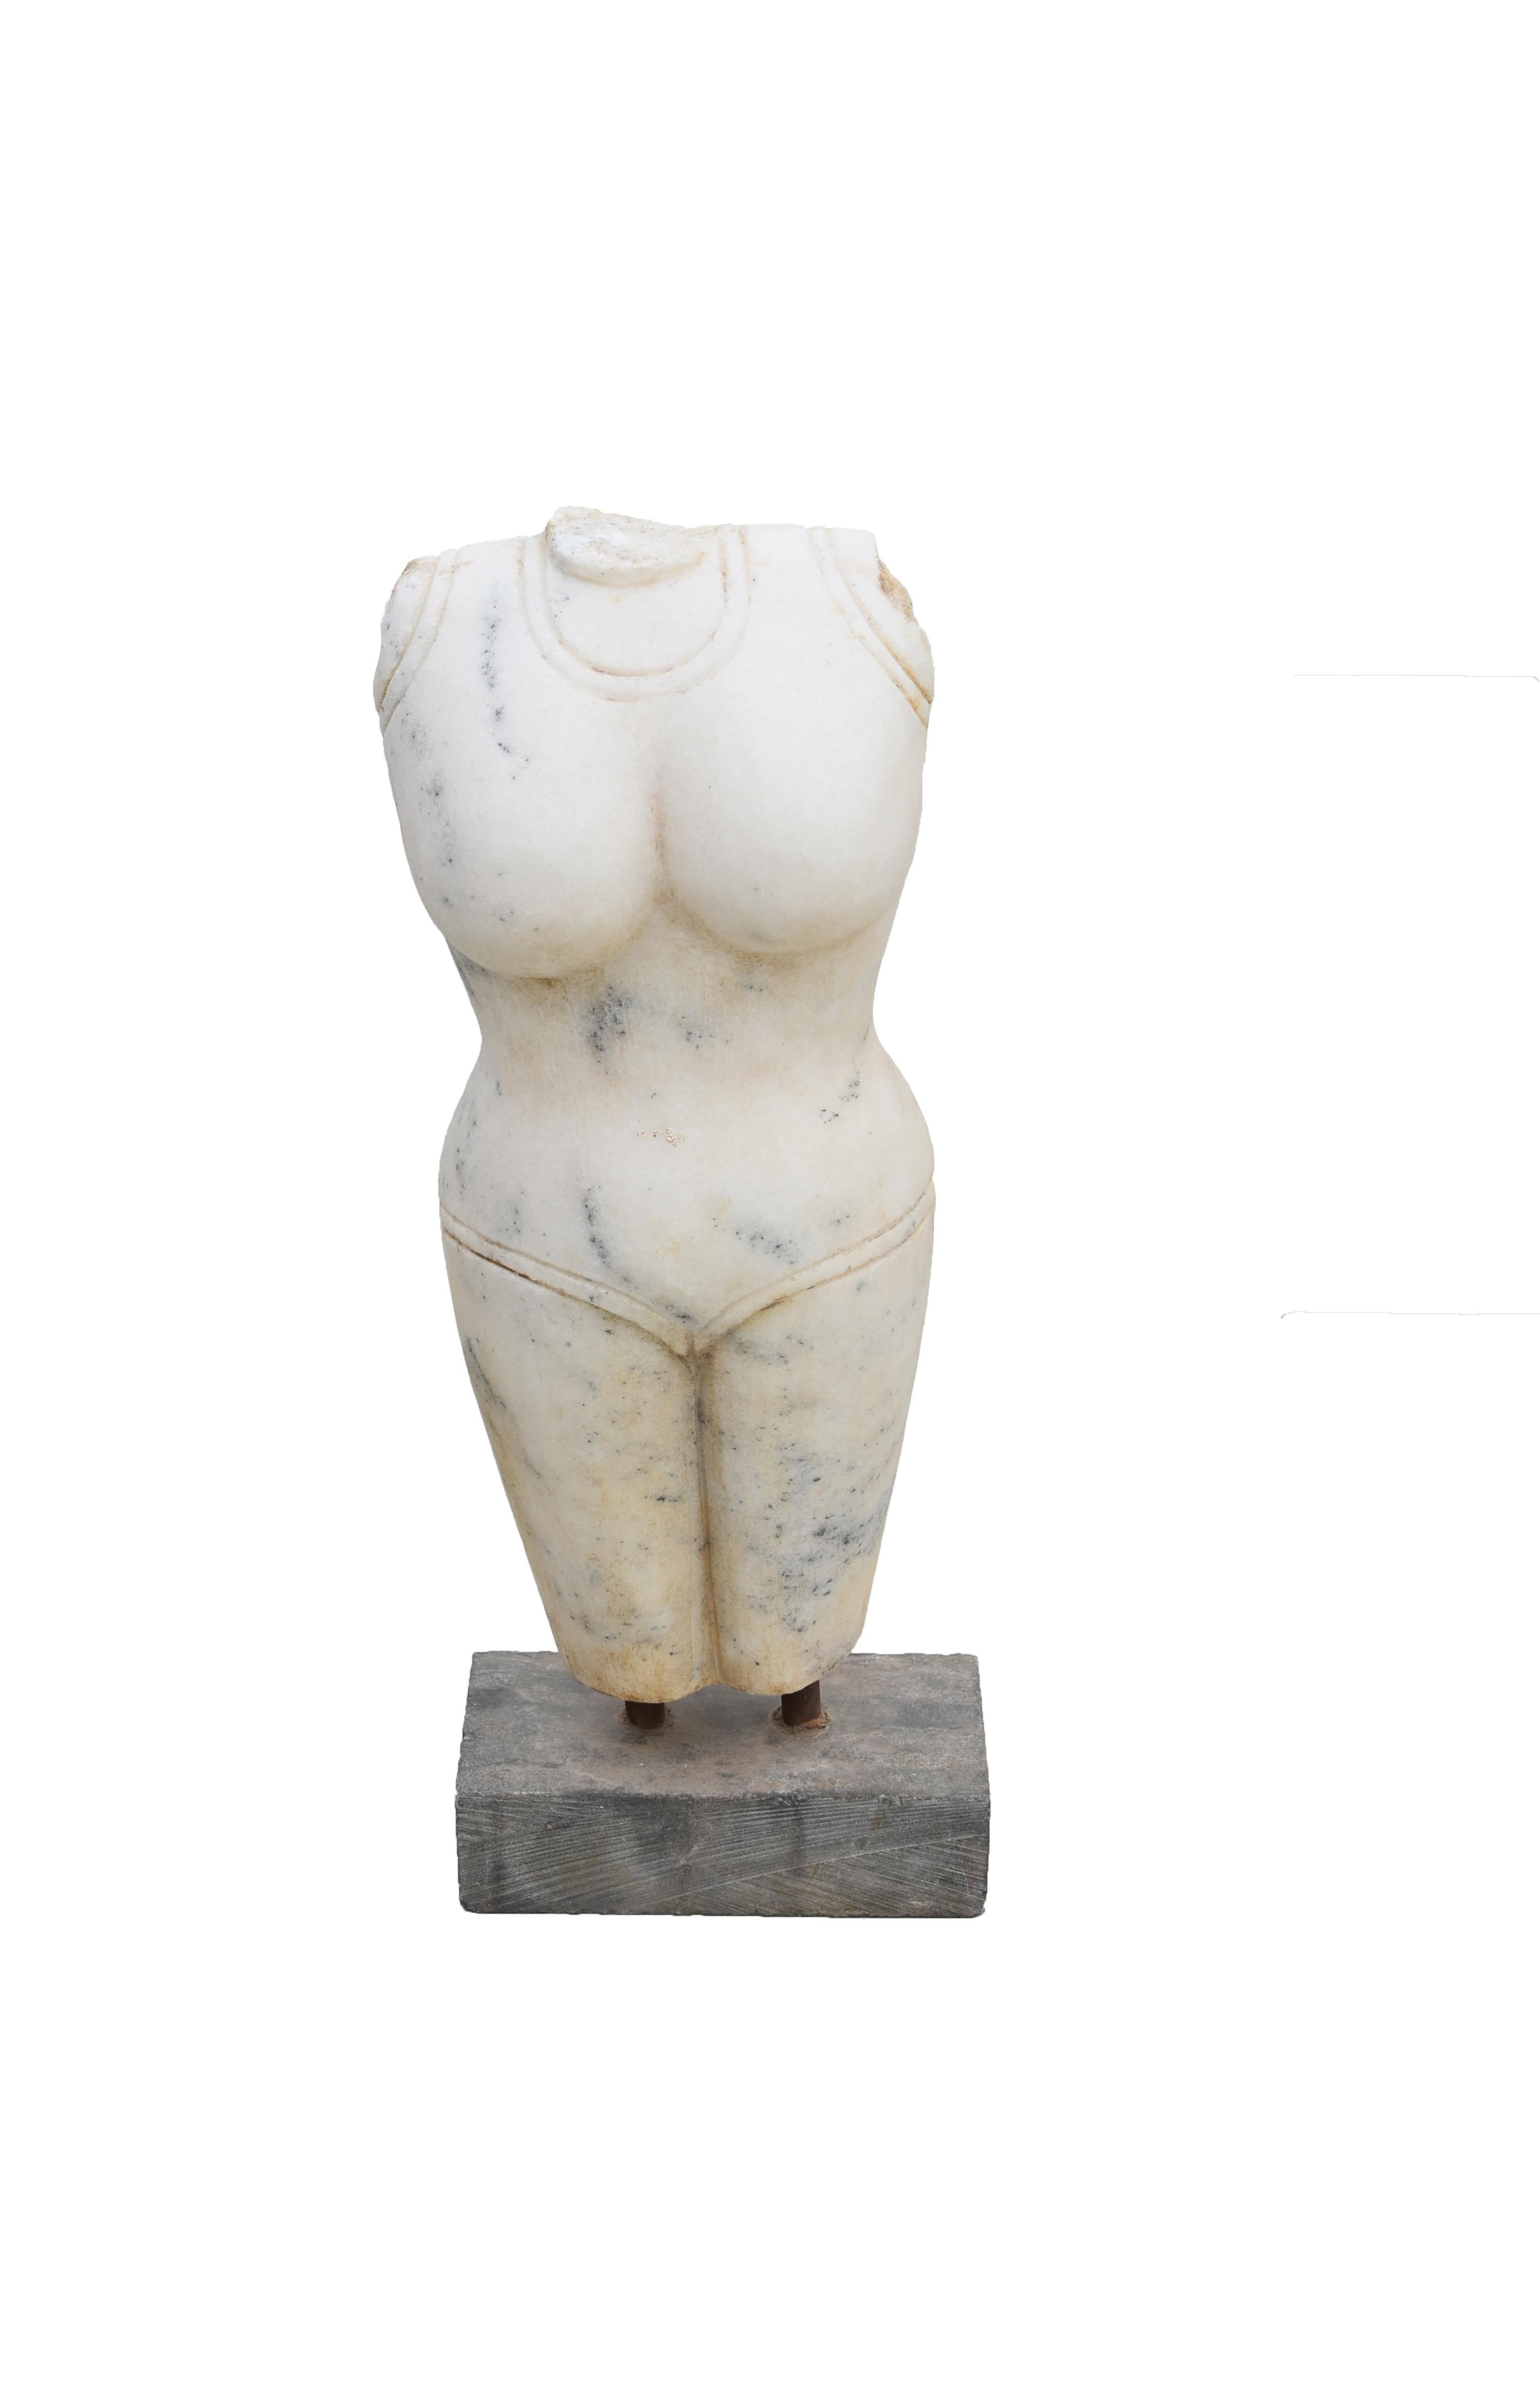 A beautiful Carrara marble torso of an Indian goddess. The torso with the diaphanous sarong wrapped around the body and secured with double belts at the waist. The female body beautiful with full bosom and robust legs, all symbols of good health and